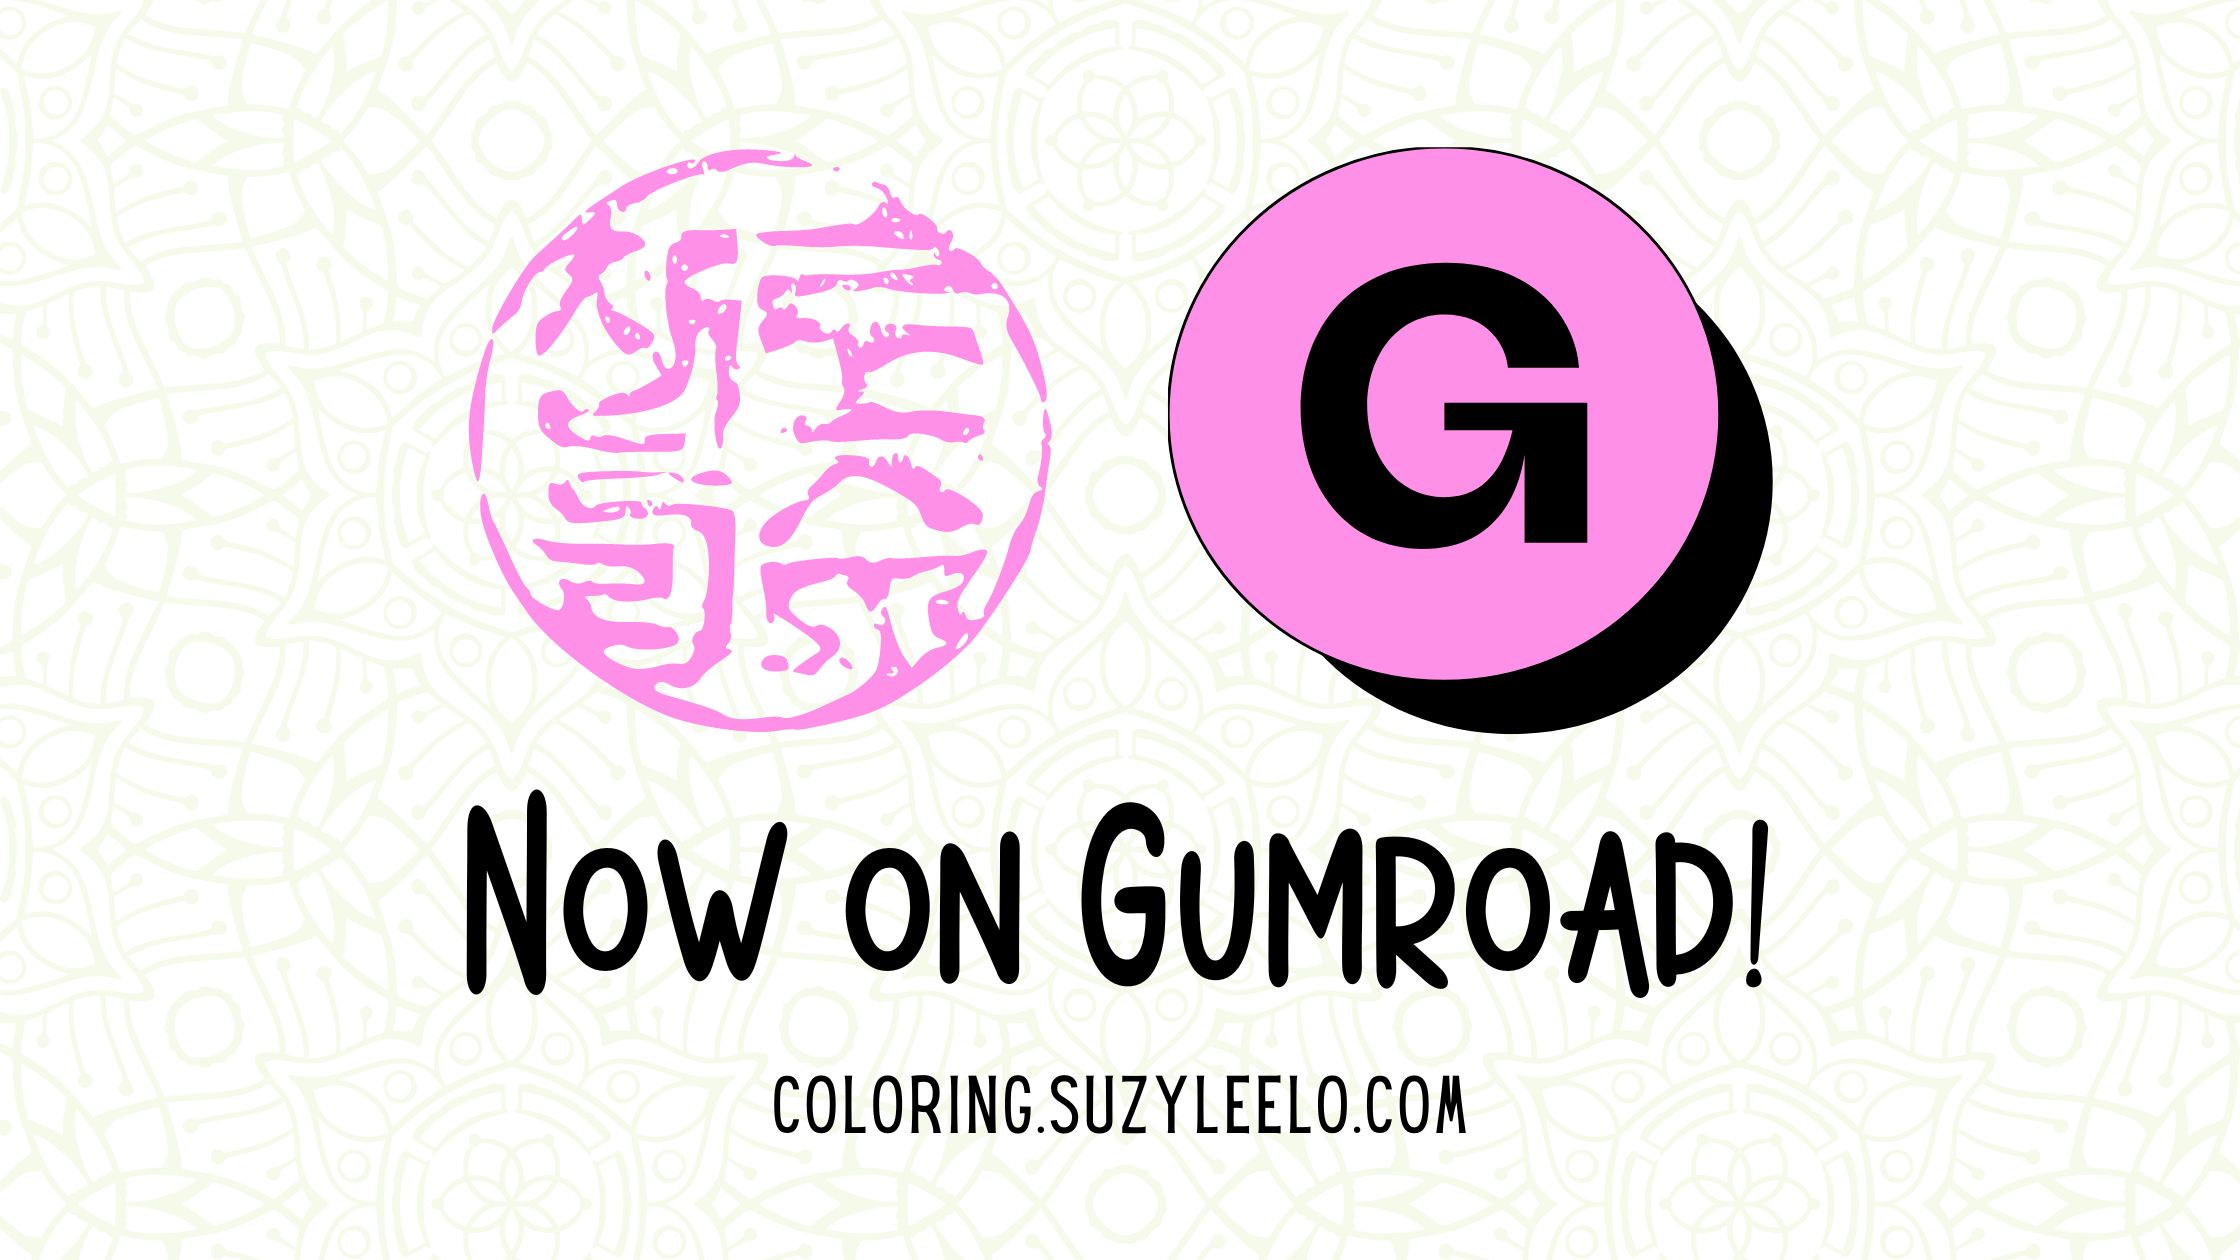 Printable Coloring Pages & Coloring Books Now On Gumroad